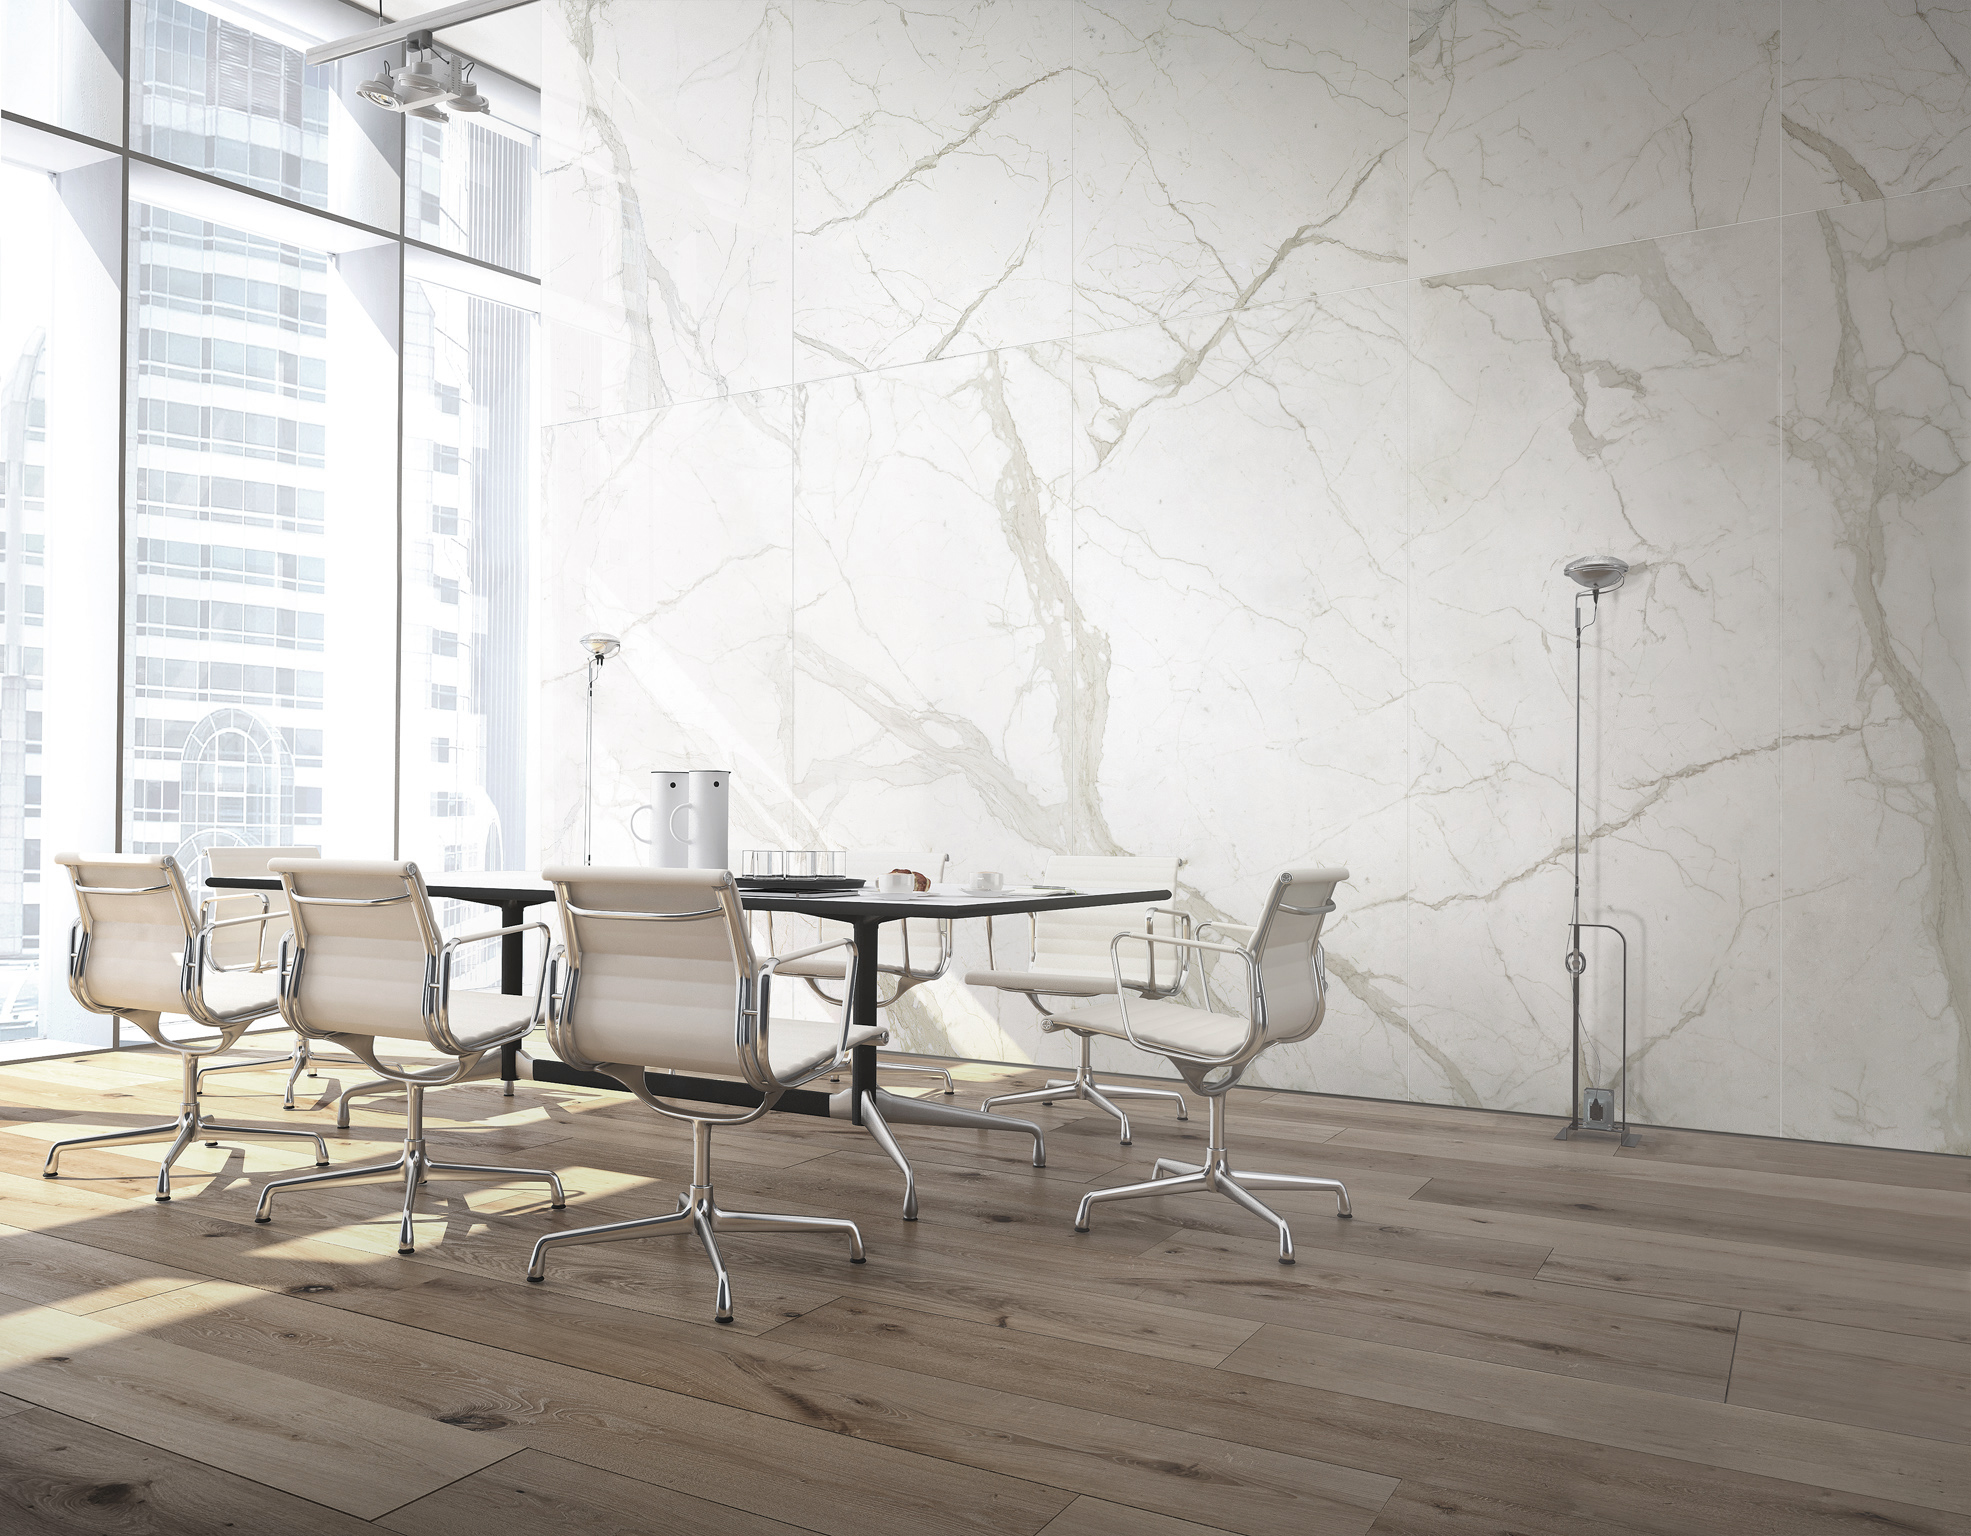 Conference room interior with a concret wall. 3d rendering